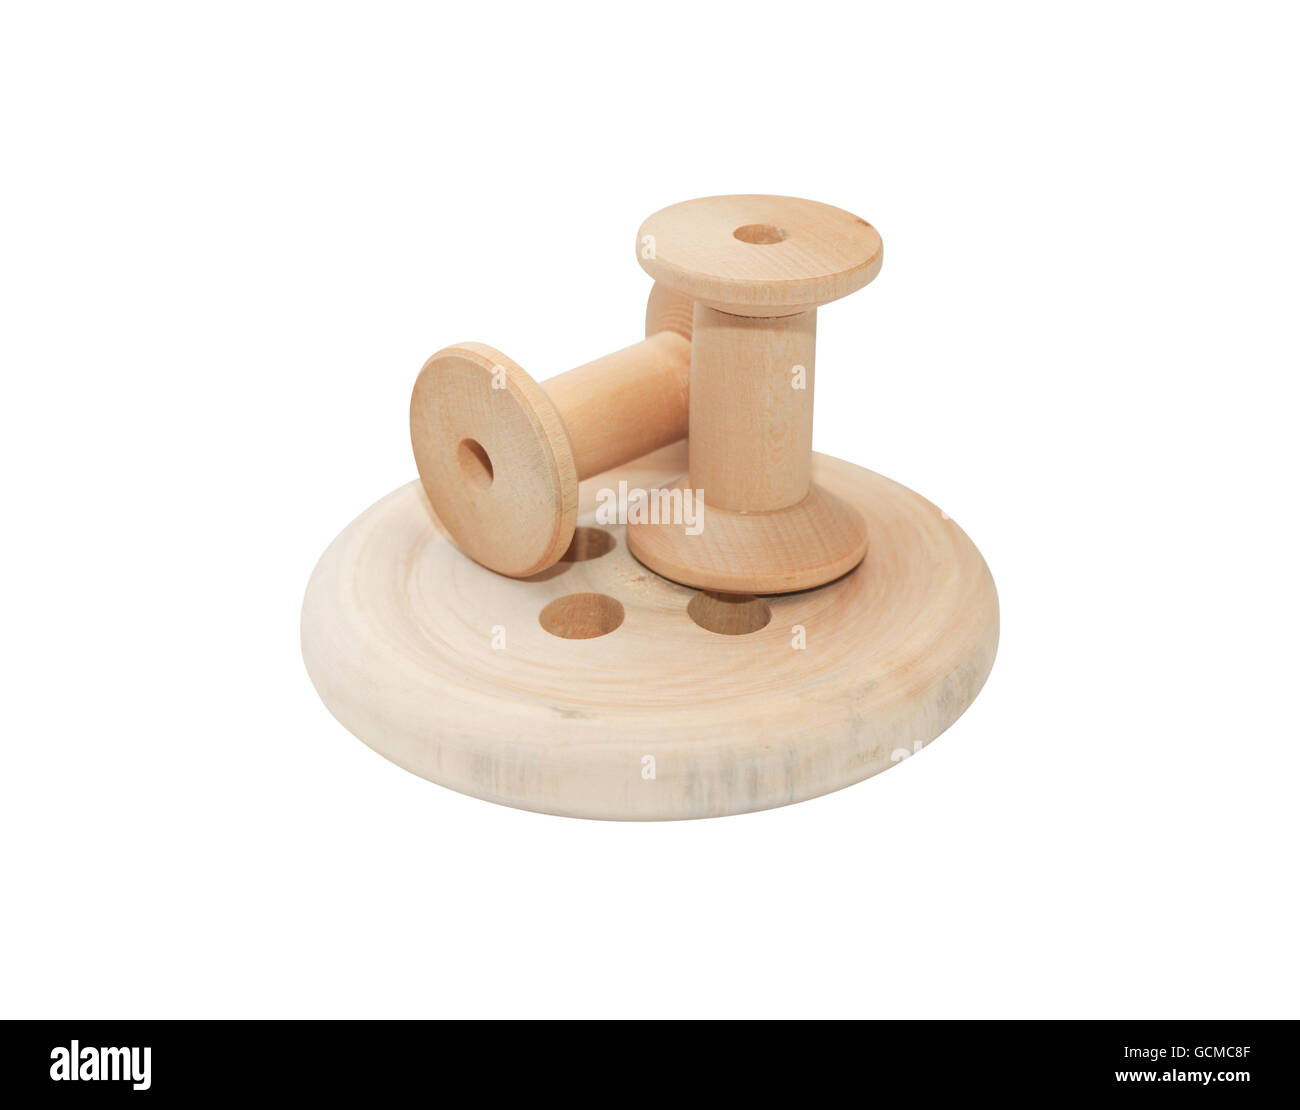 Sewing concept. Two empty wooden spools on big button.  Isolated on white background with clipping path Stock Photo